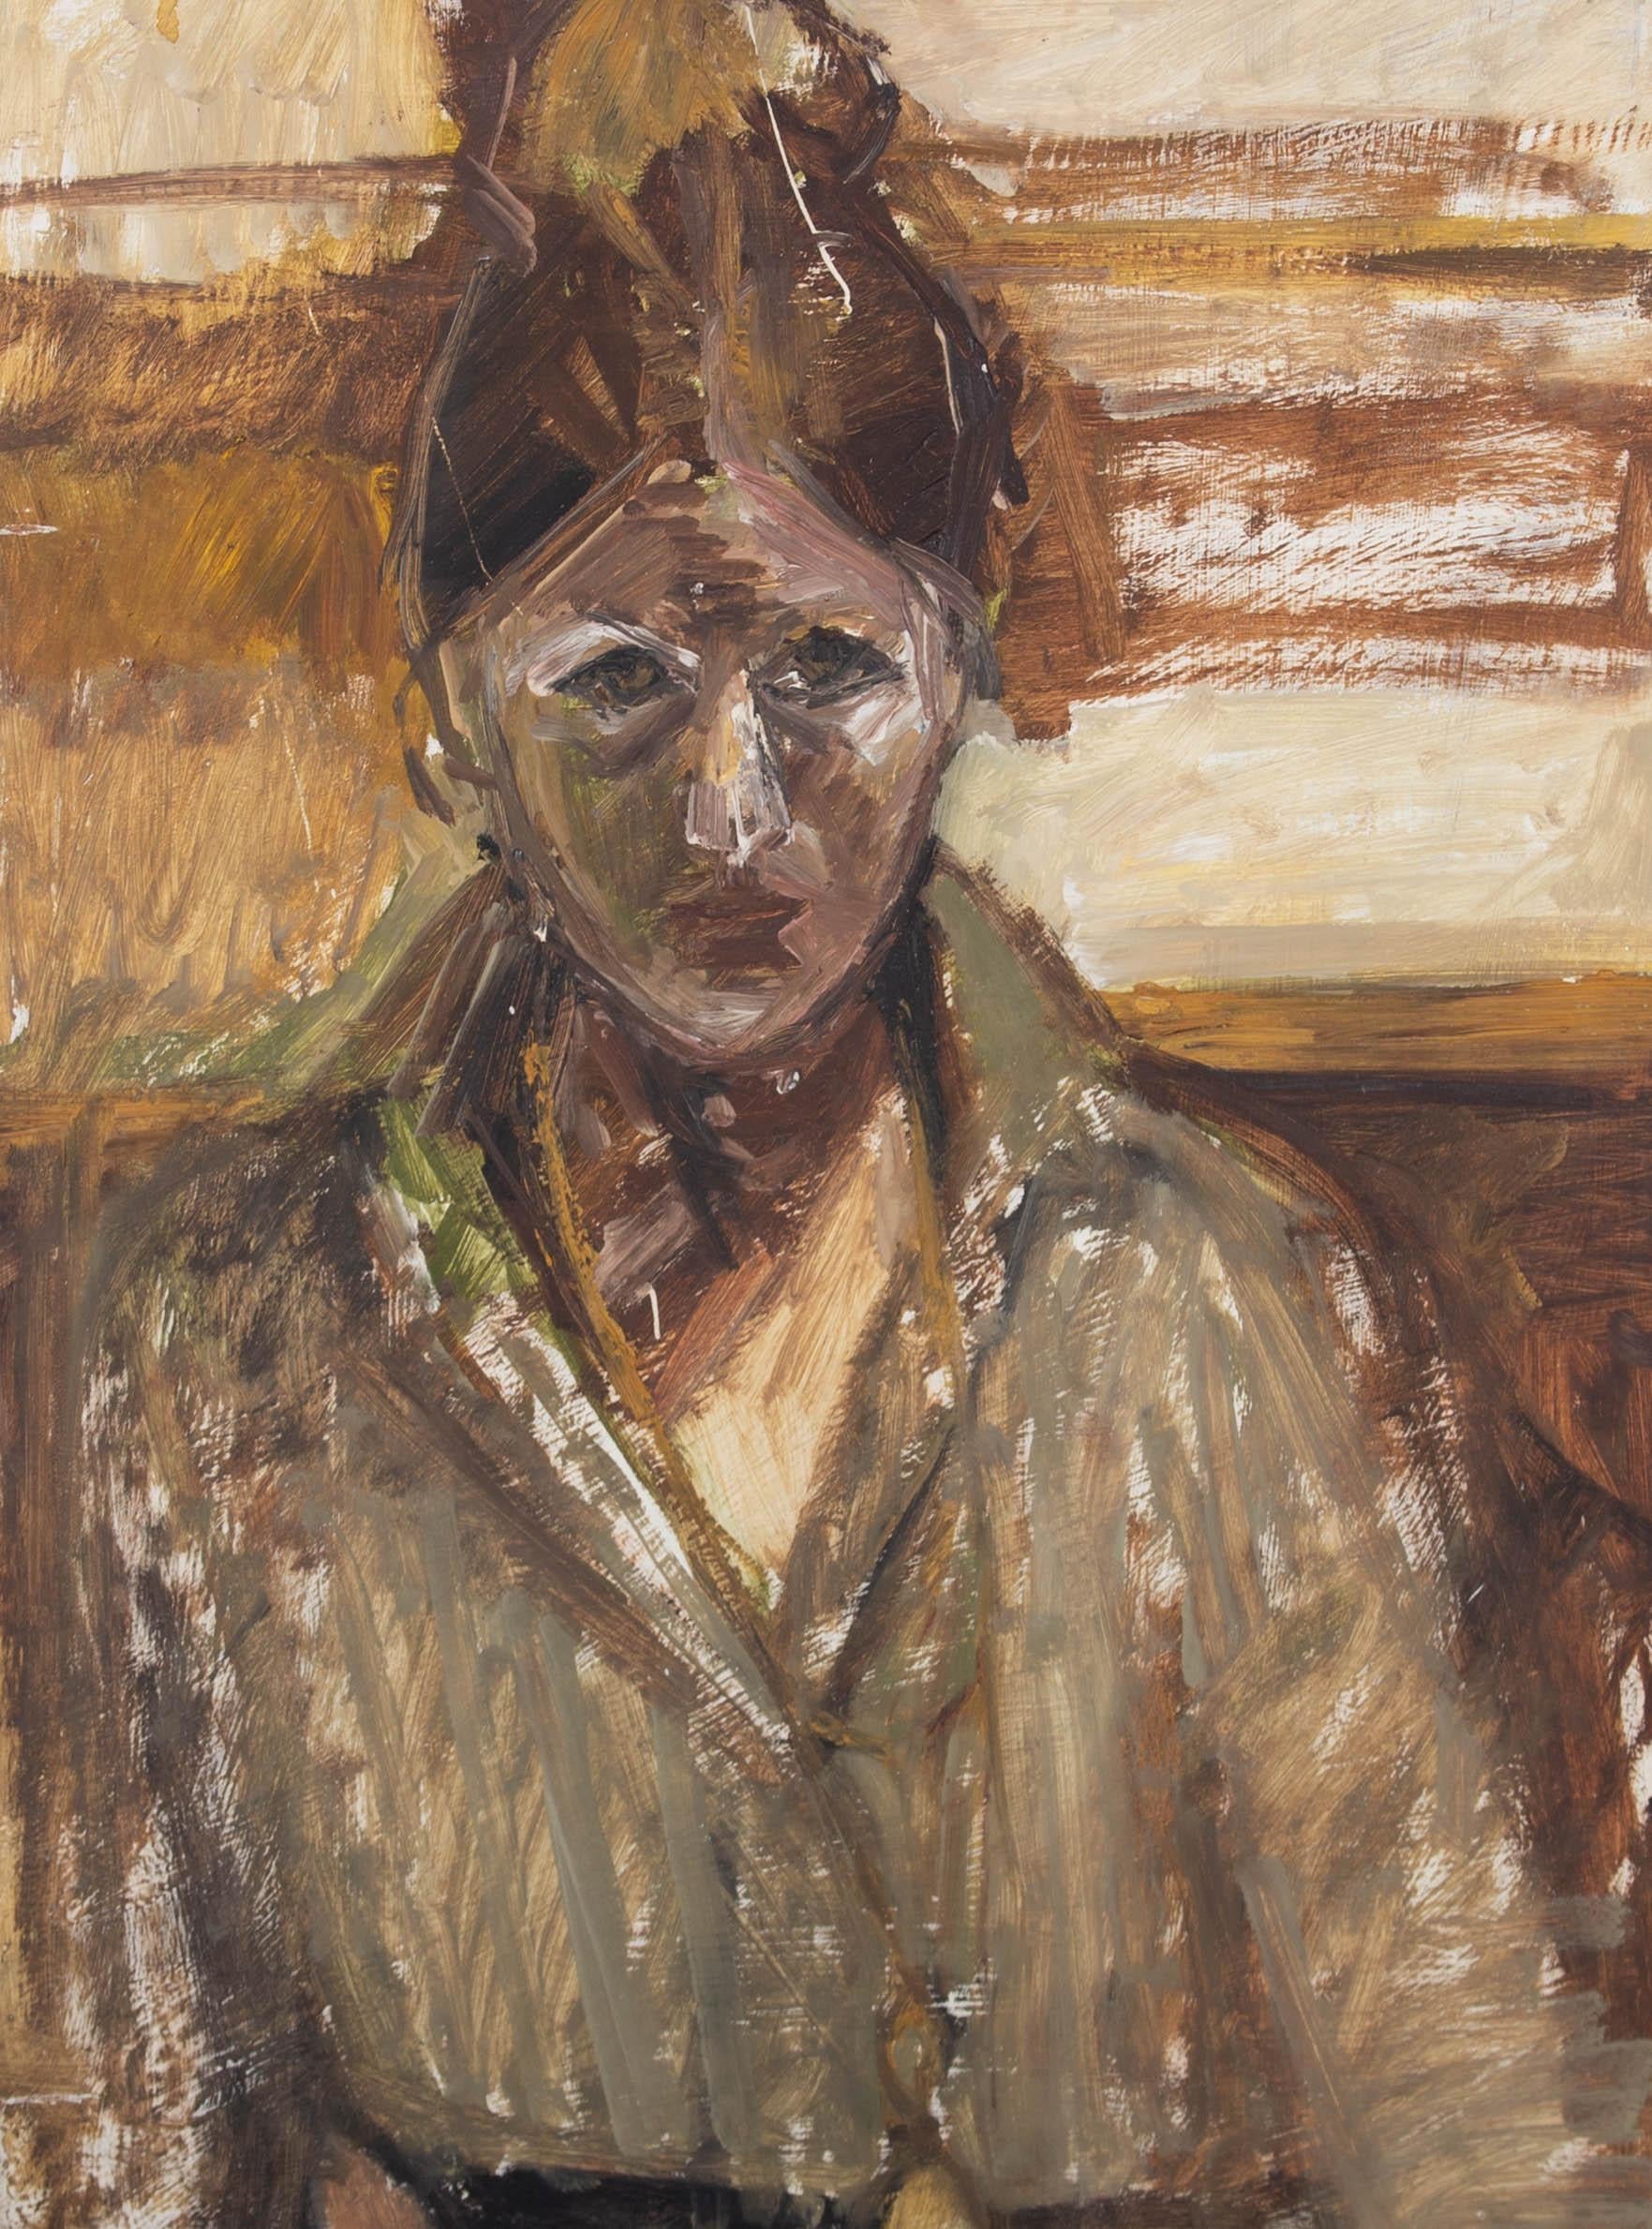 This expressive portrait depicts a woman with her hair swept back into a bun with a serious expression. Painted in an earthy palette of browns and greens, the artist uses sweeping, gestural brushstrokes to create a portrait that is full of movement